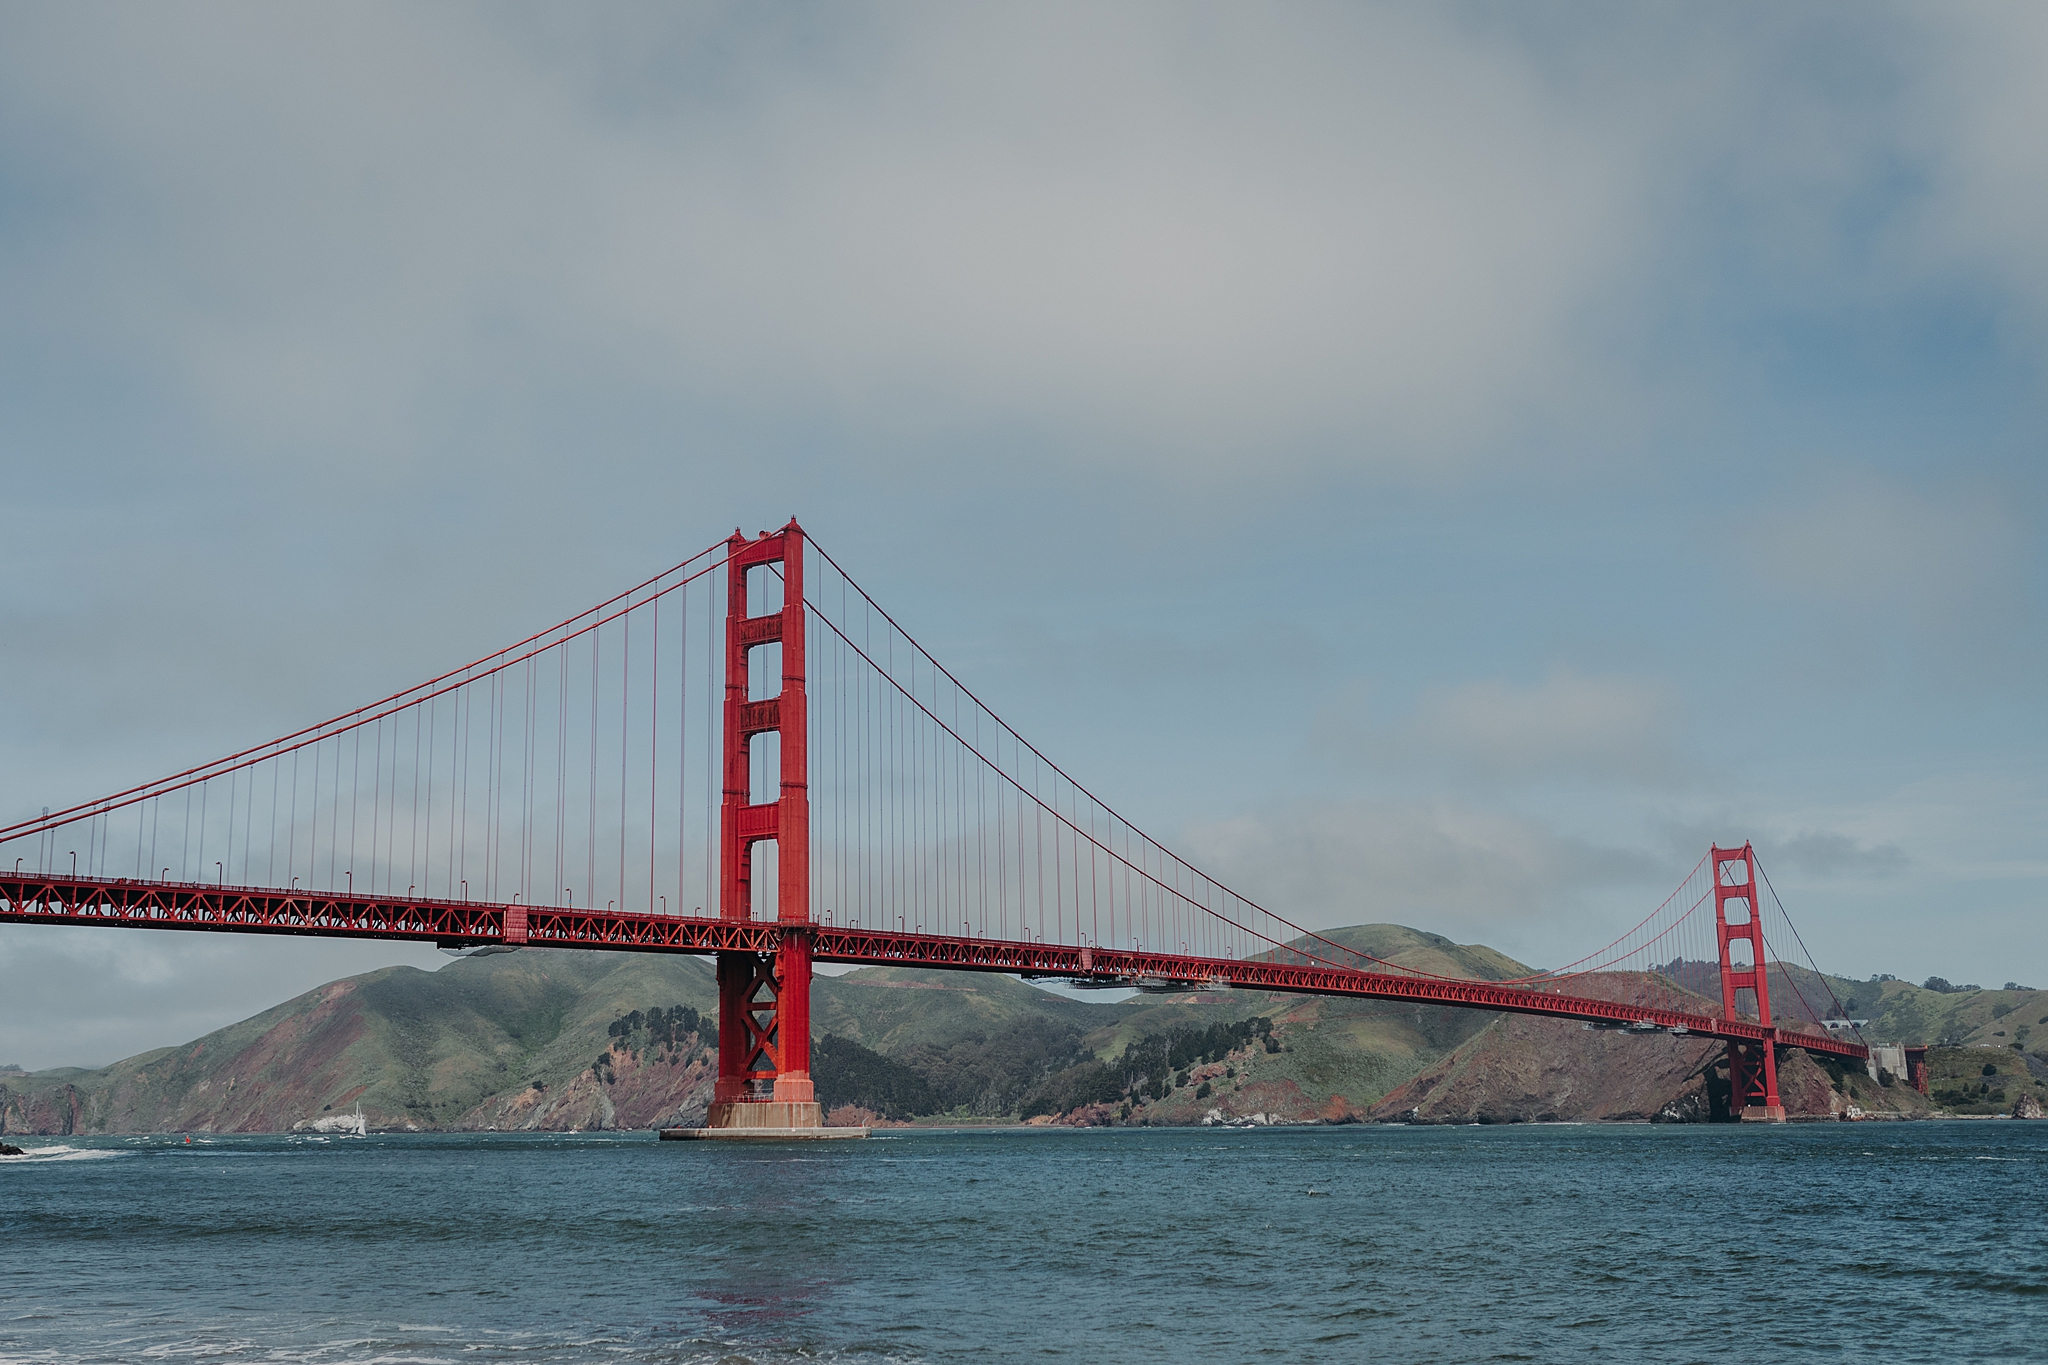 Best Spots for Photos in San Francisco